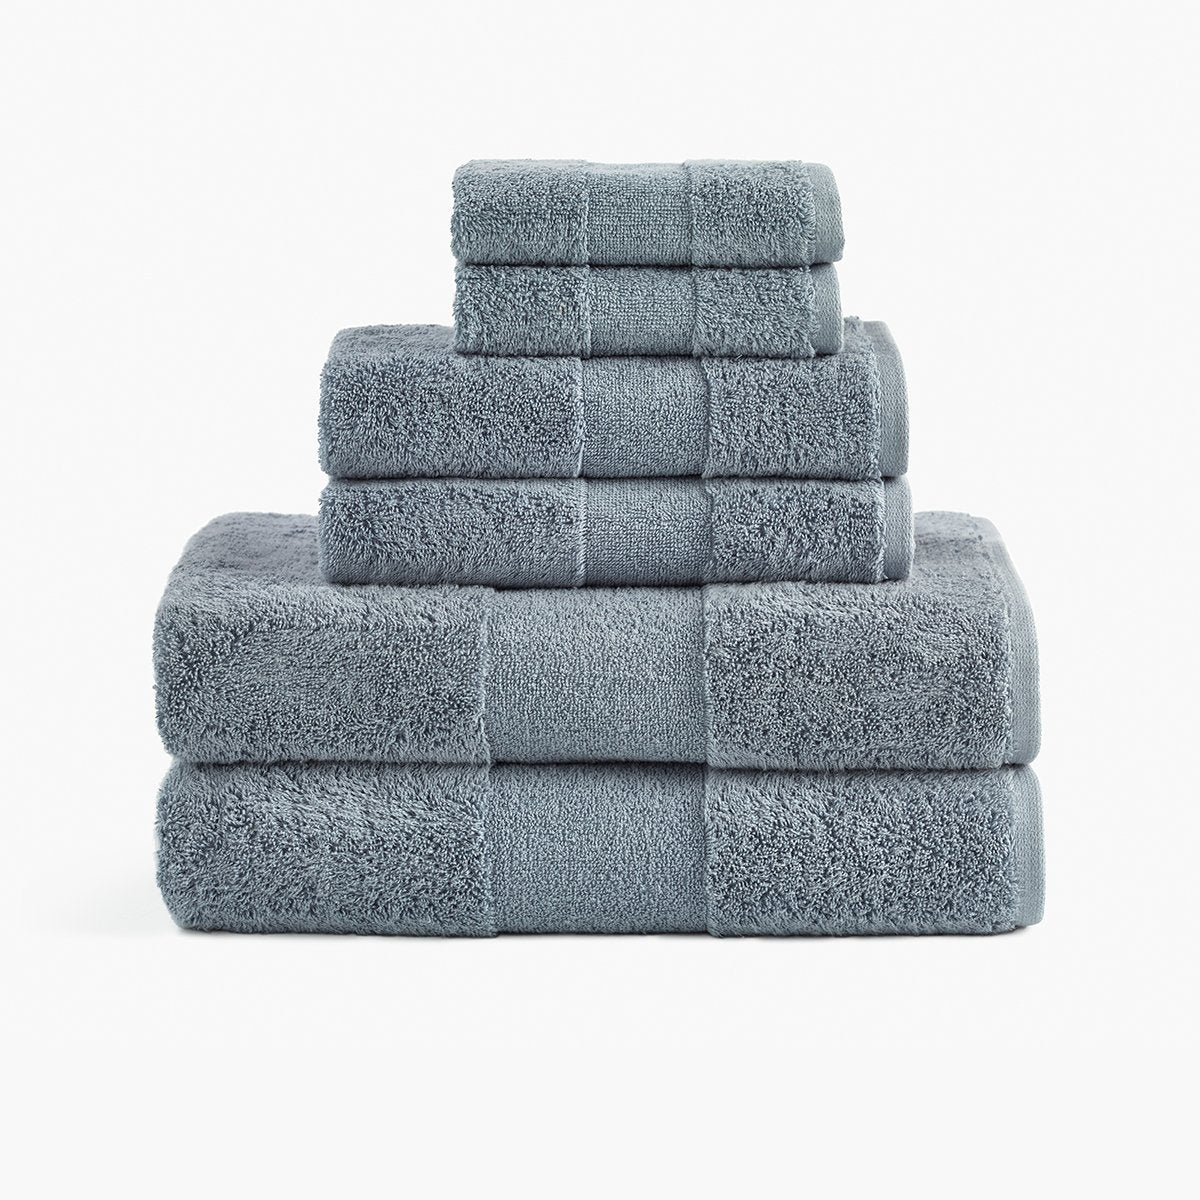 Cotton Super Soft Towels, Ultra Soft Towel Hand Bath Thick Towel for  Bathroom, Blue Gray, Pack of 1